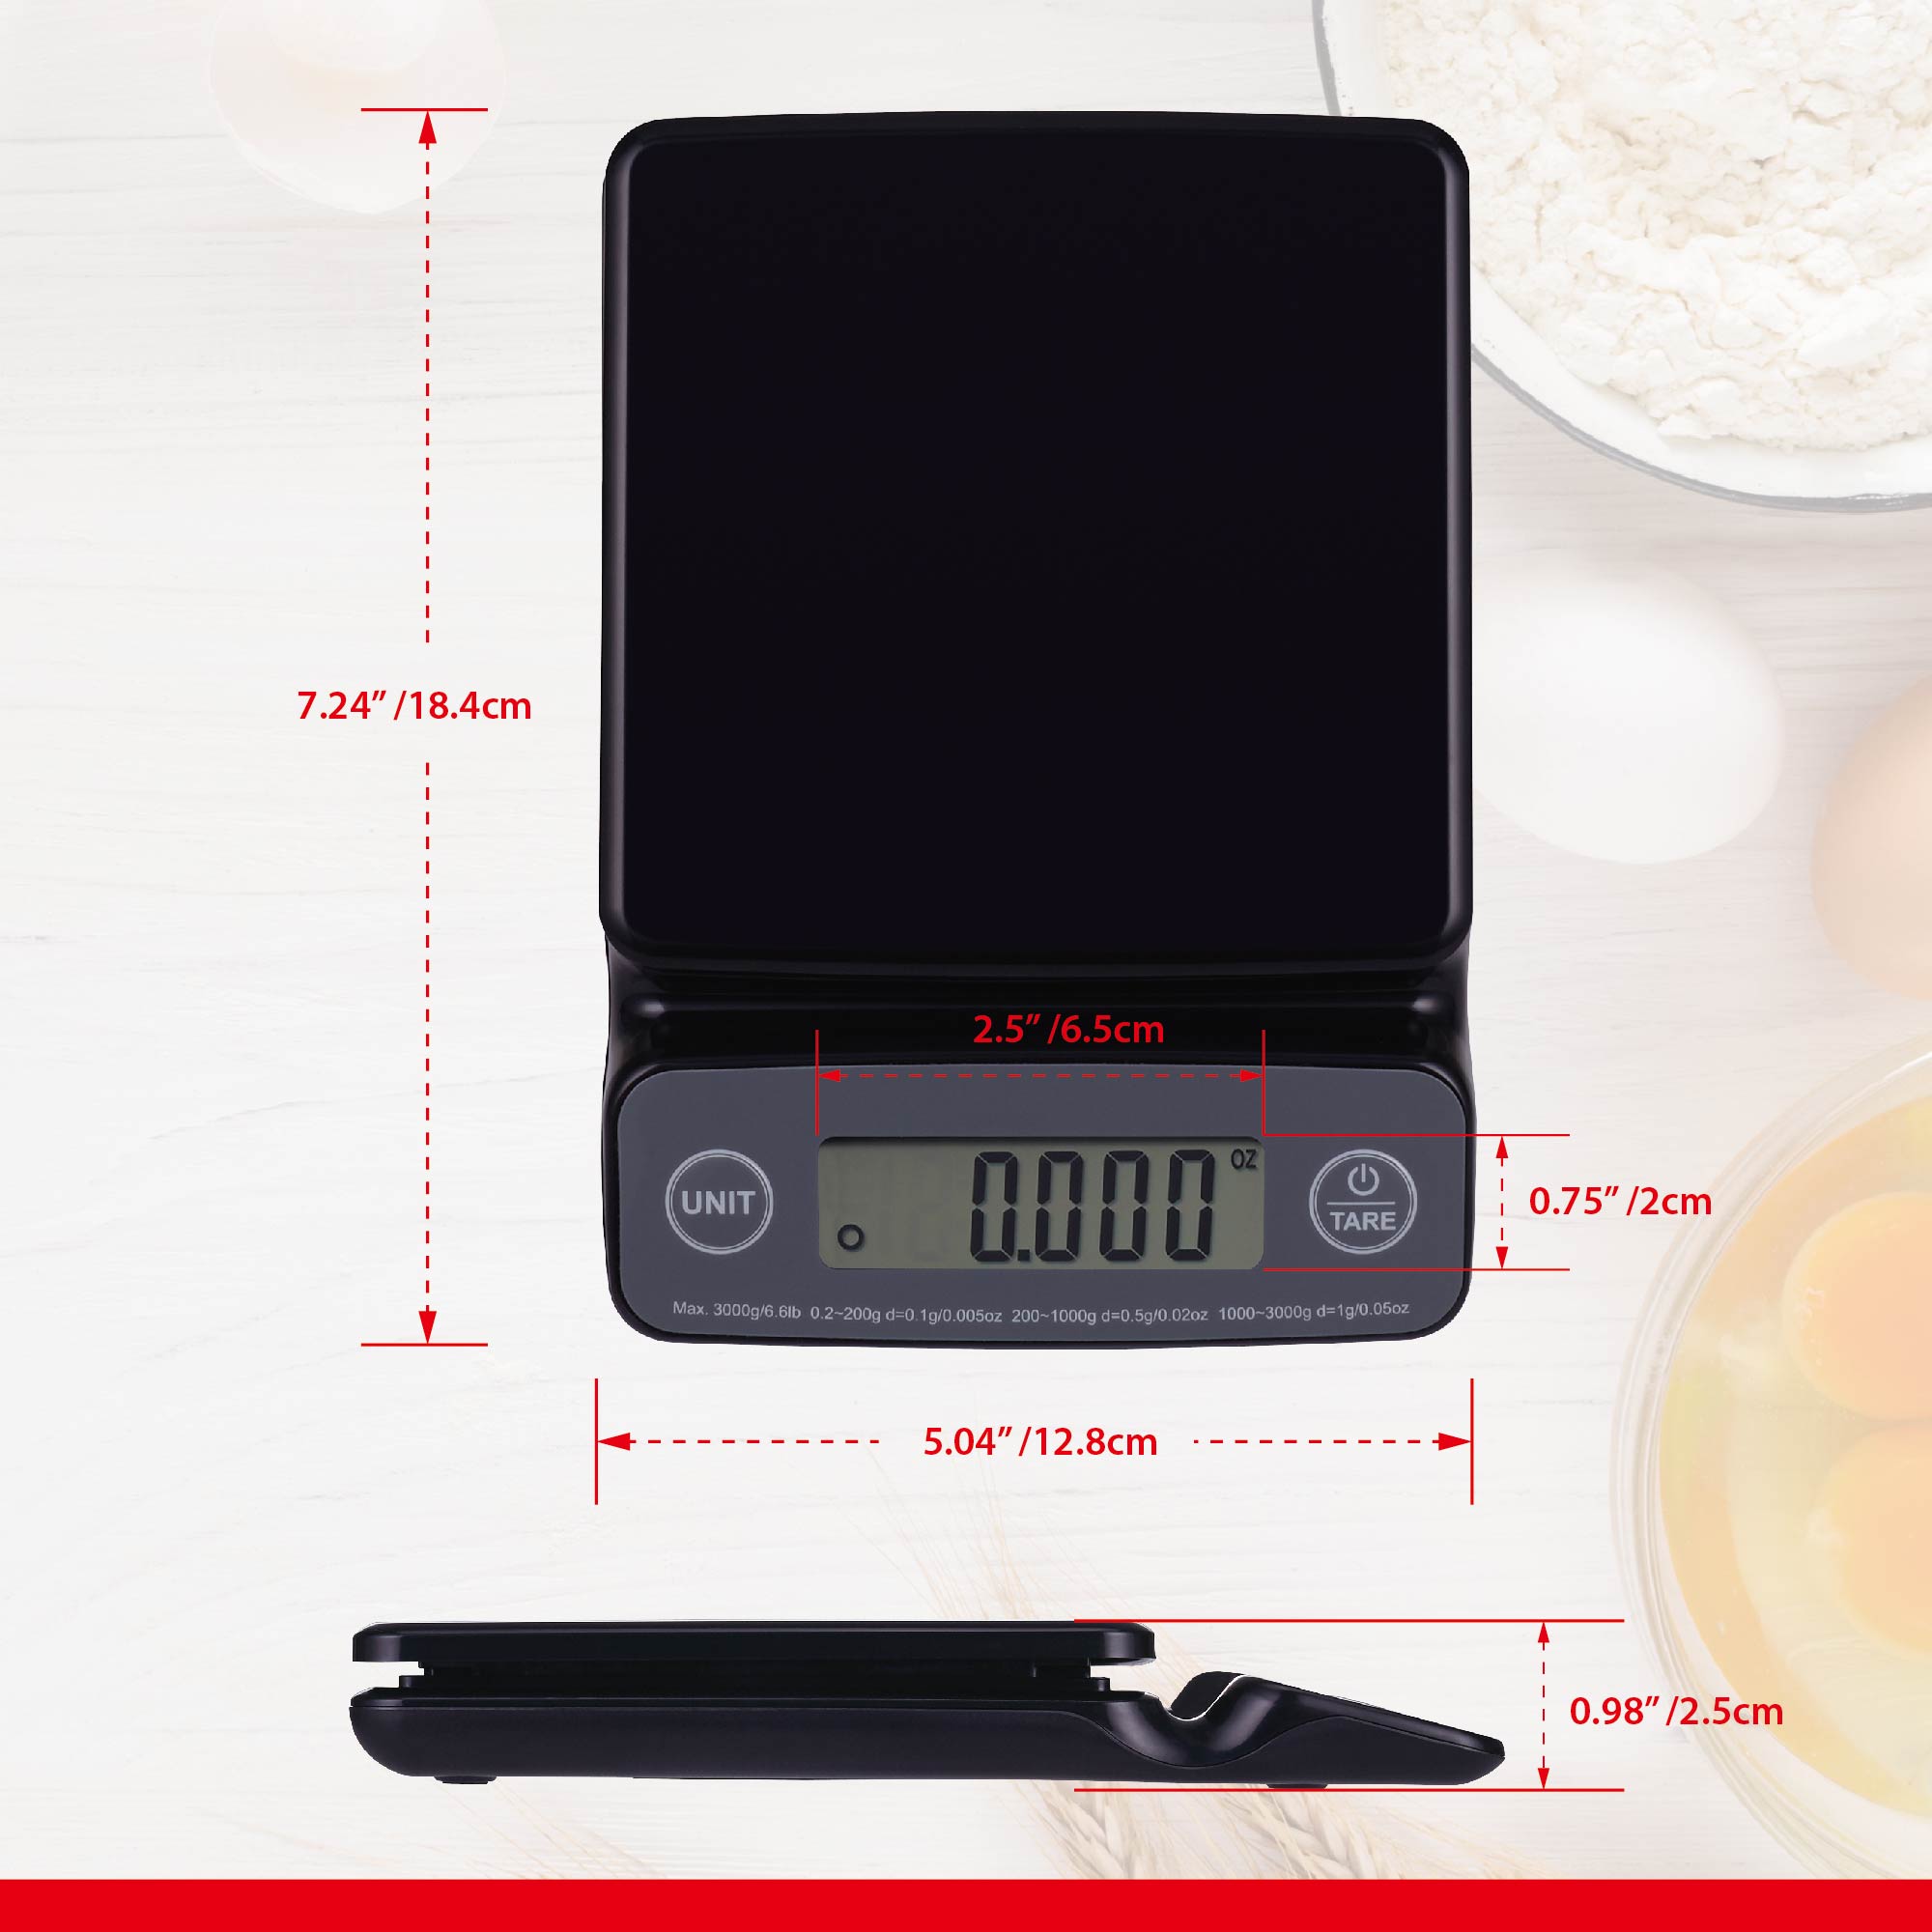 Mainstays High Precision Digital Kitchen Scale, Black - image 4 of 12